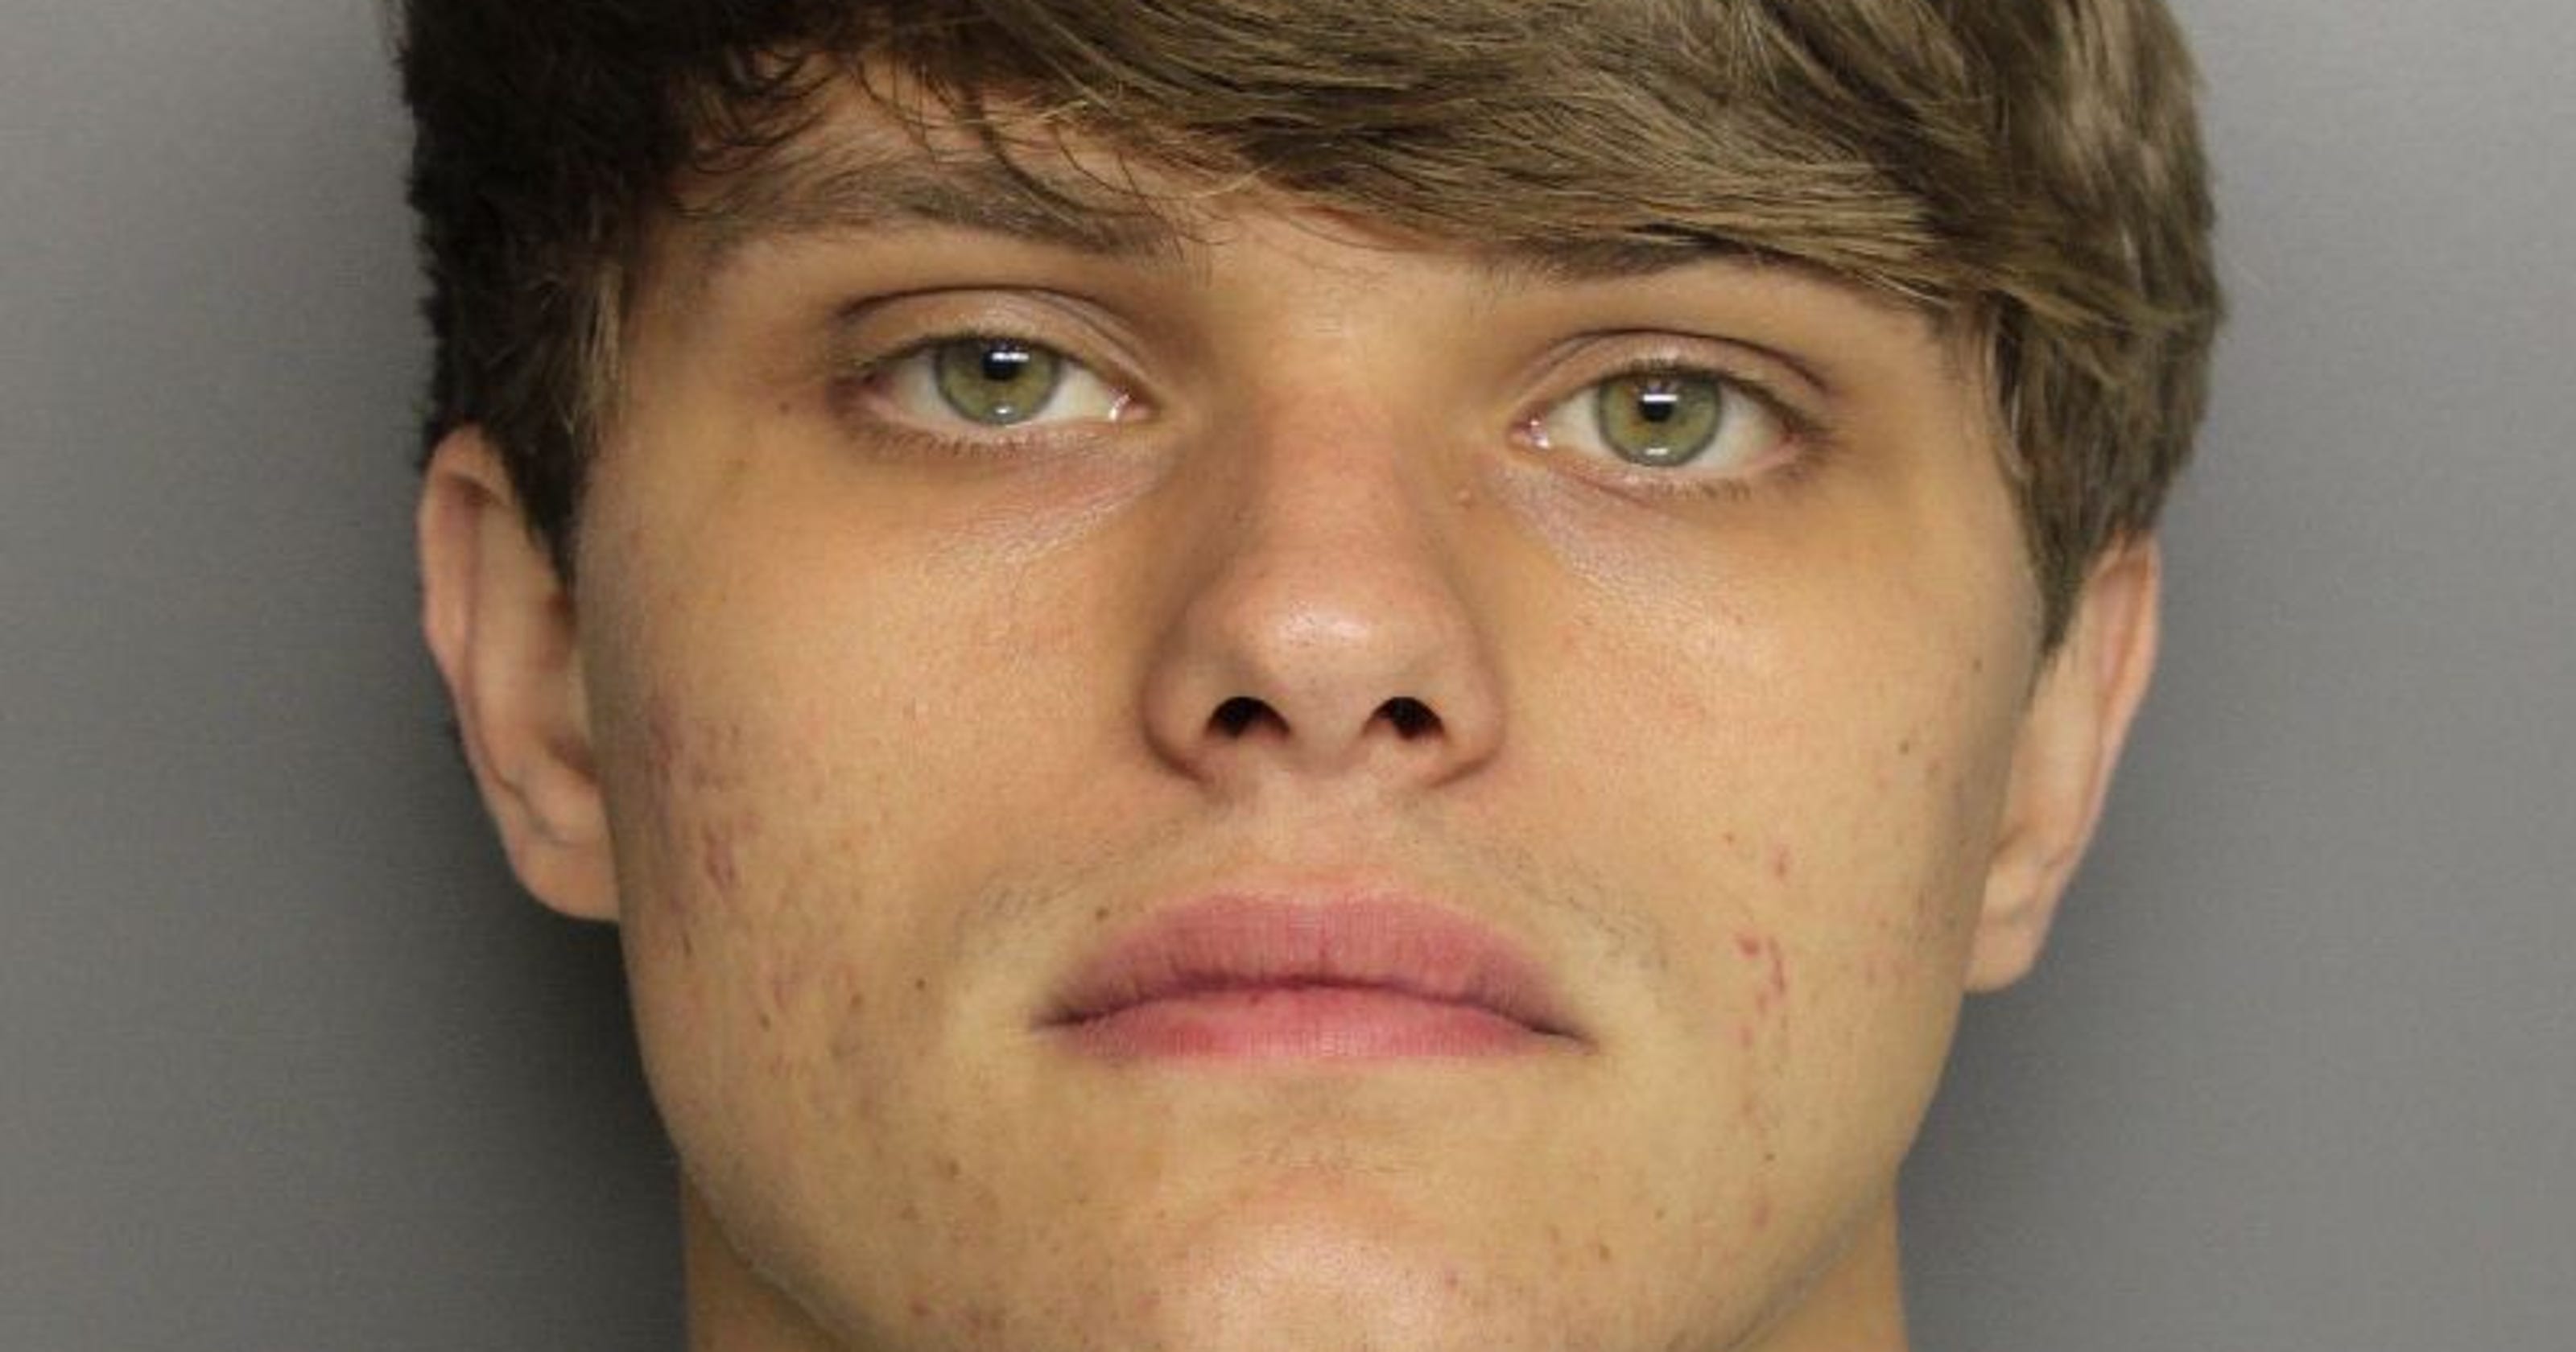 Greenville Teen Charged After Sex Act Photo Shared On Snapchat